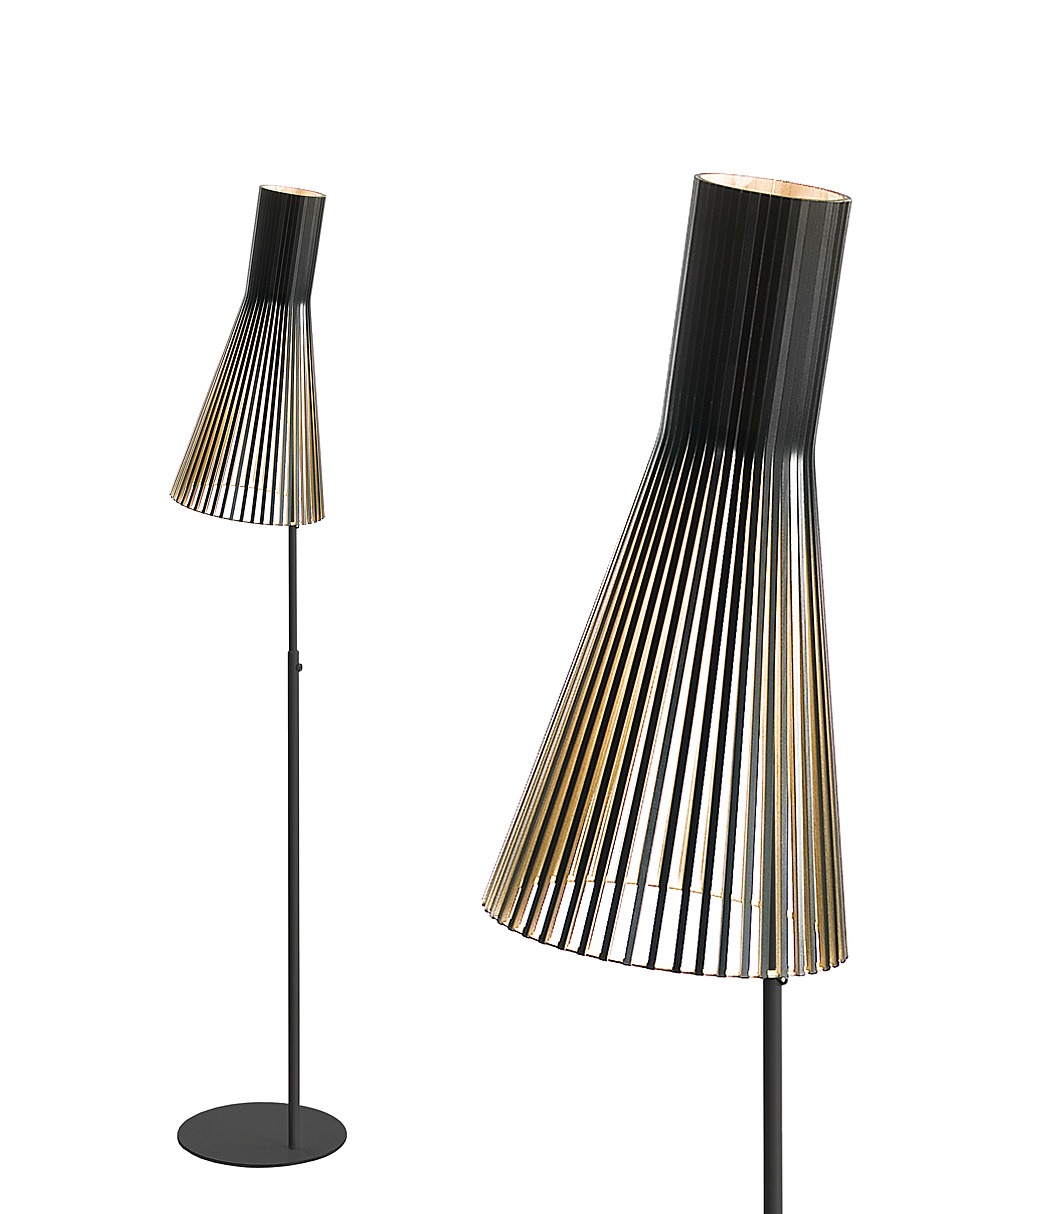 Secto 4210 floor lamp is available in black laminated